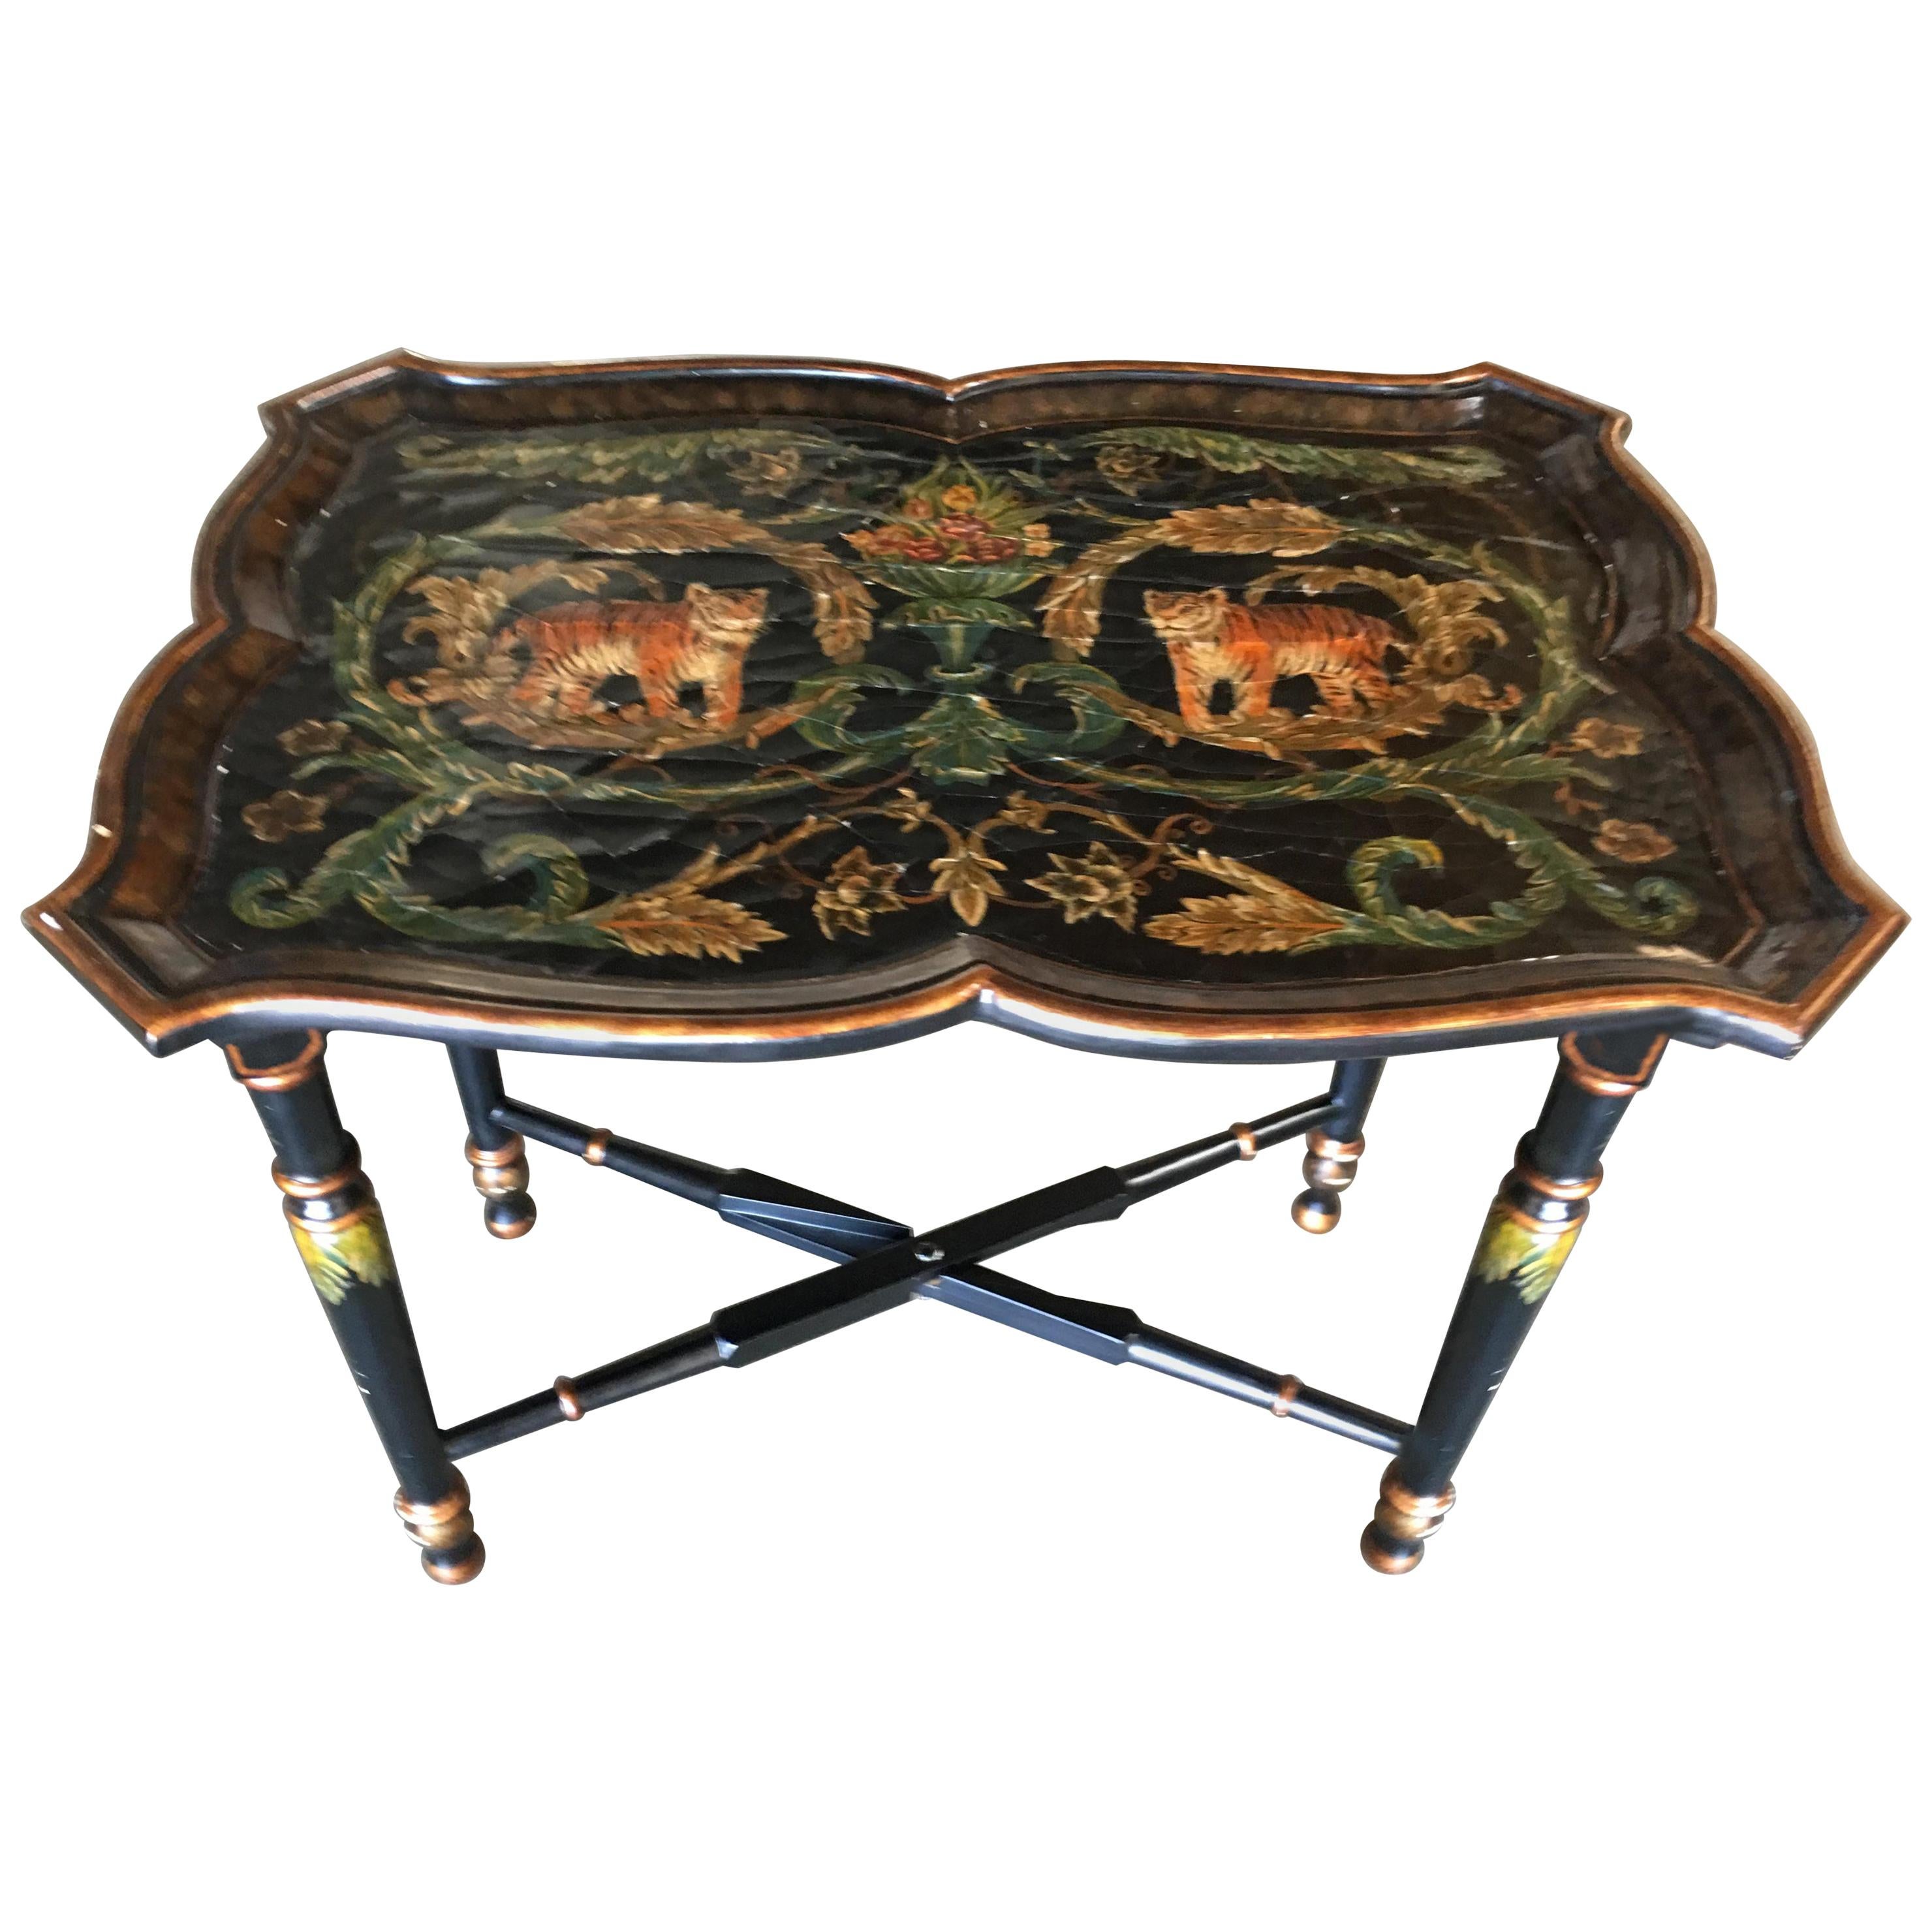 Black Carved Wood Tray Table and Stand with Tiger Motif